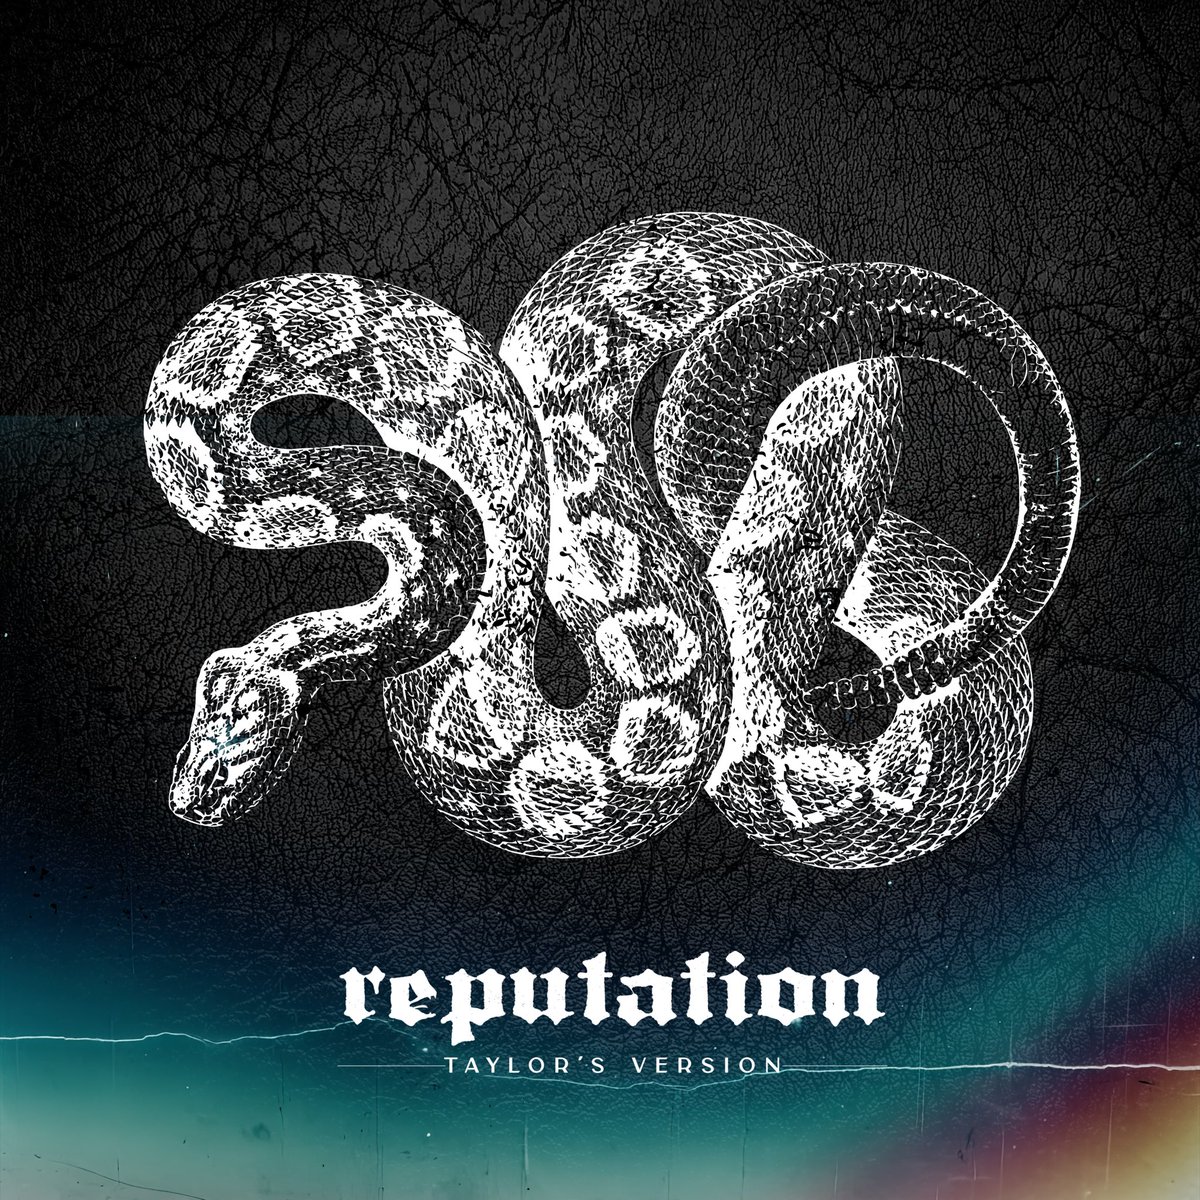 I think this is what the #reputation #taylorsversion cover should look like. @taylorswift13